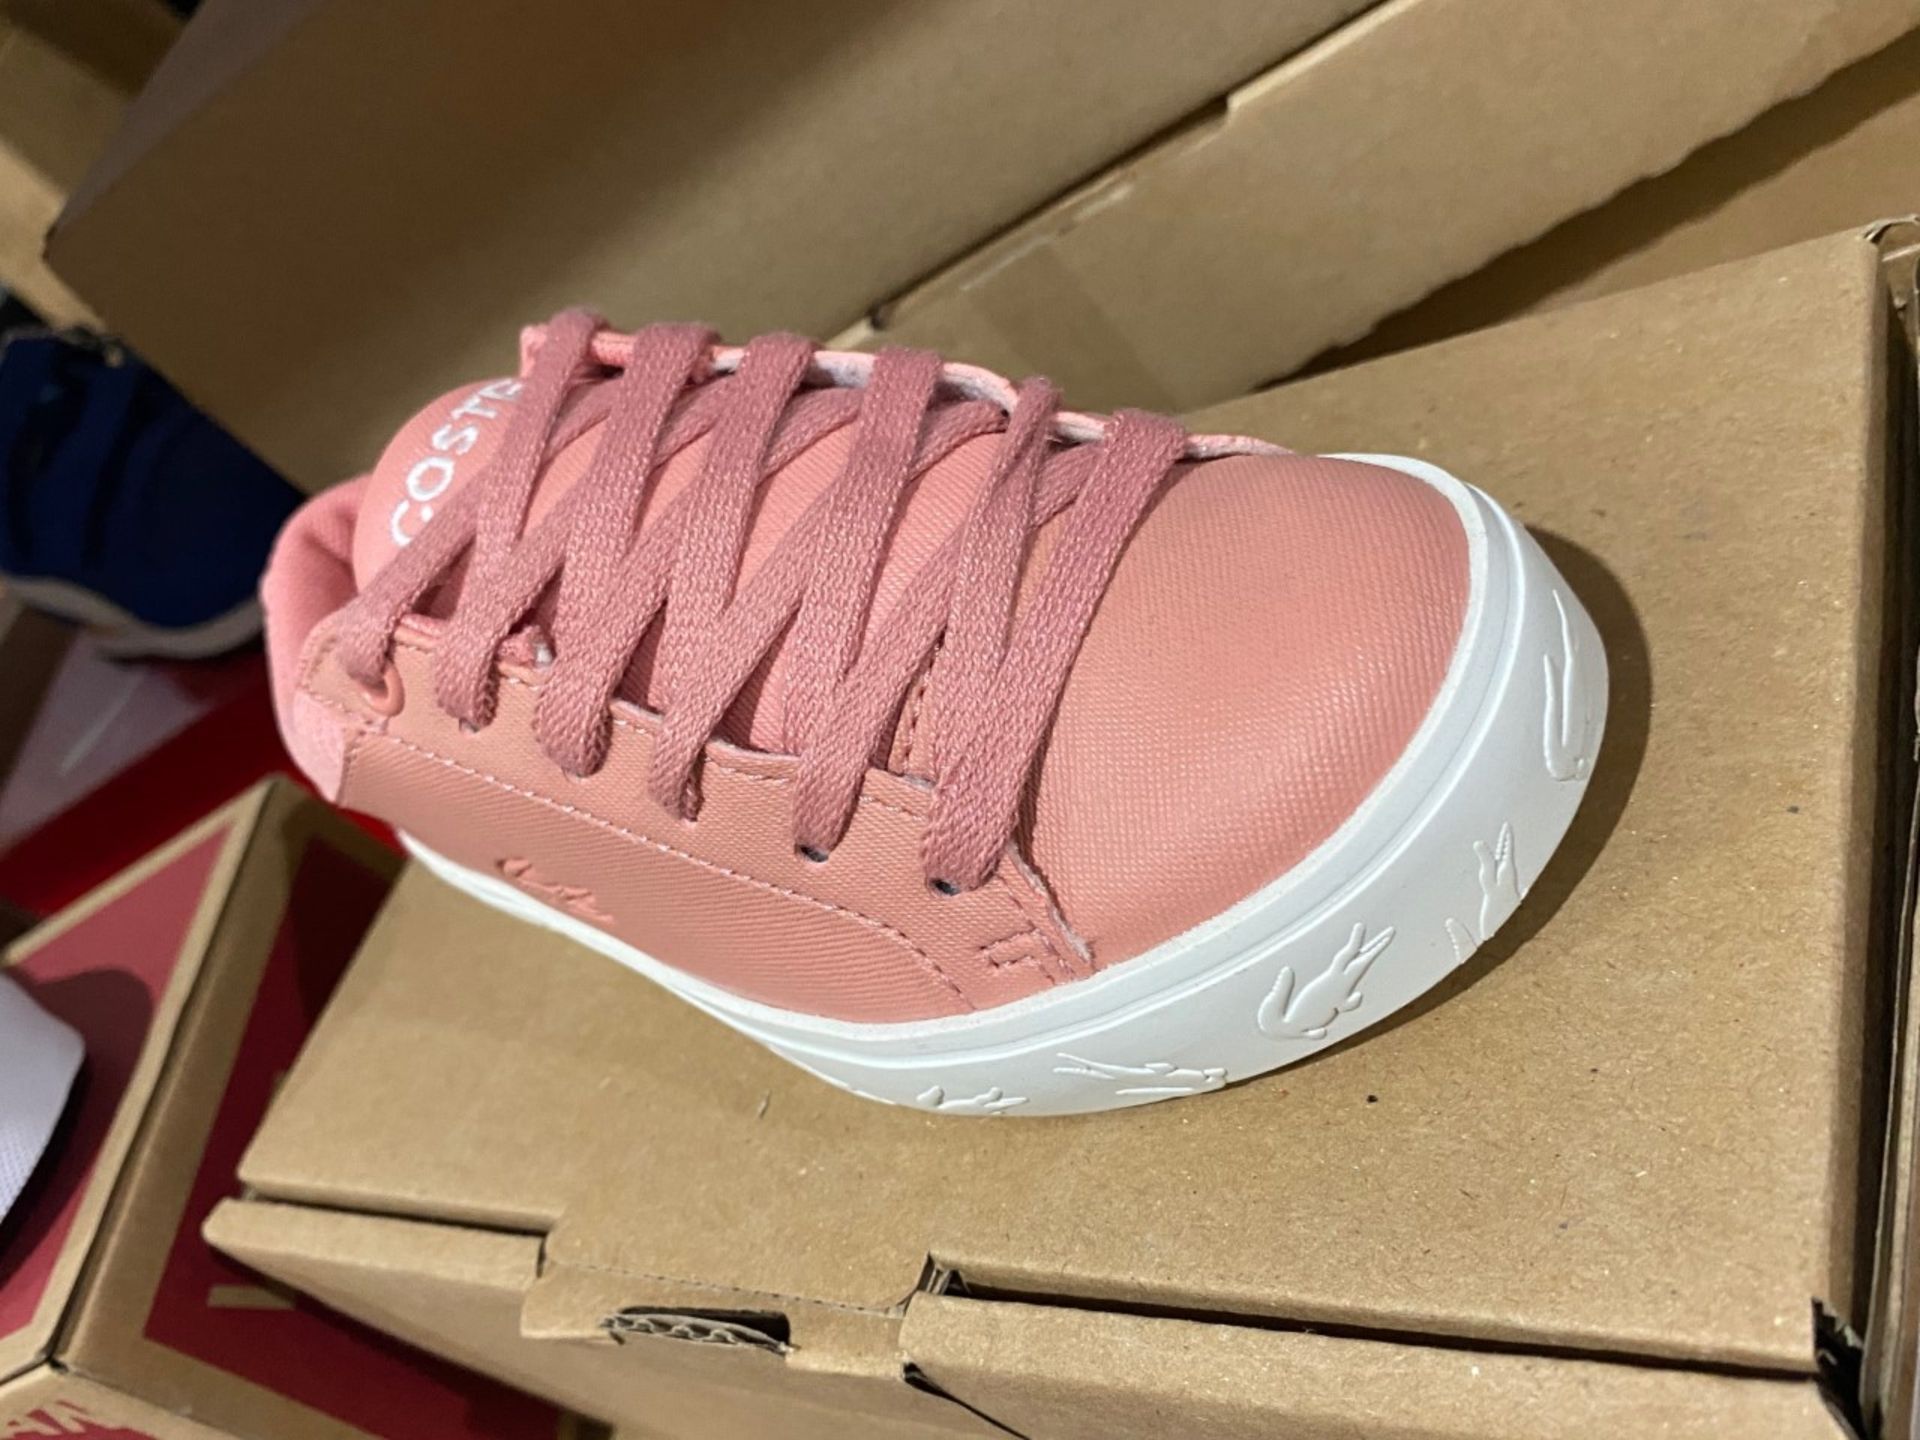 NEW & BOXED LACOSTE PINK LOGO TRAINER SIZE INFANT 10 - Image 2 of 2